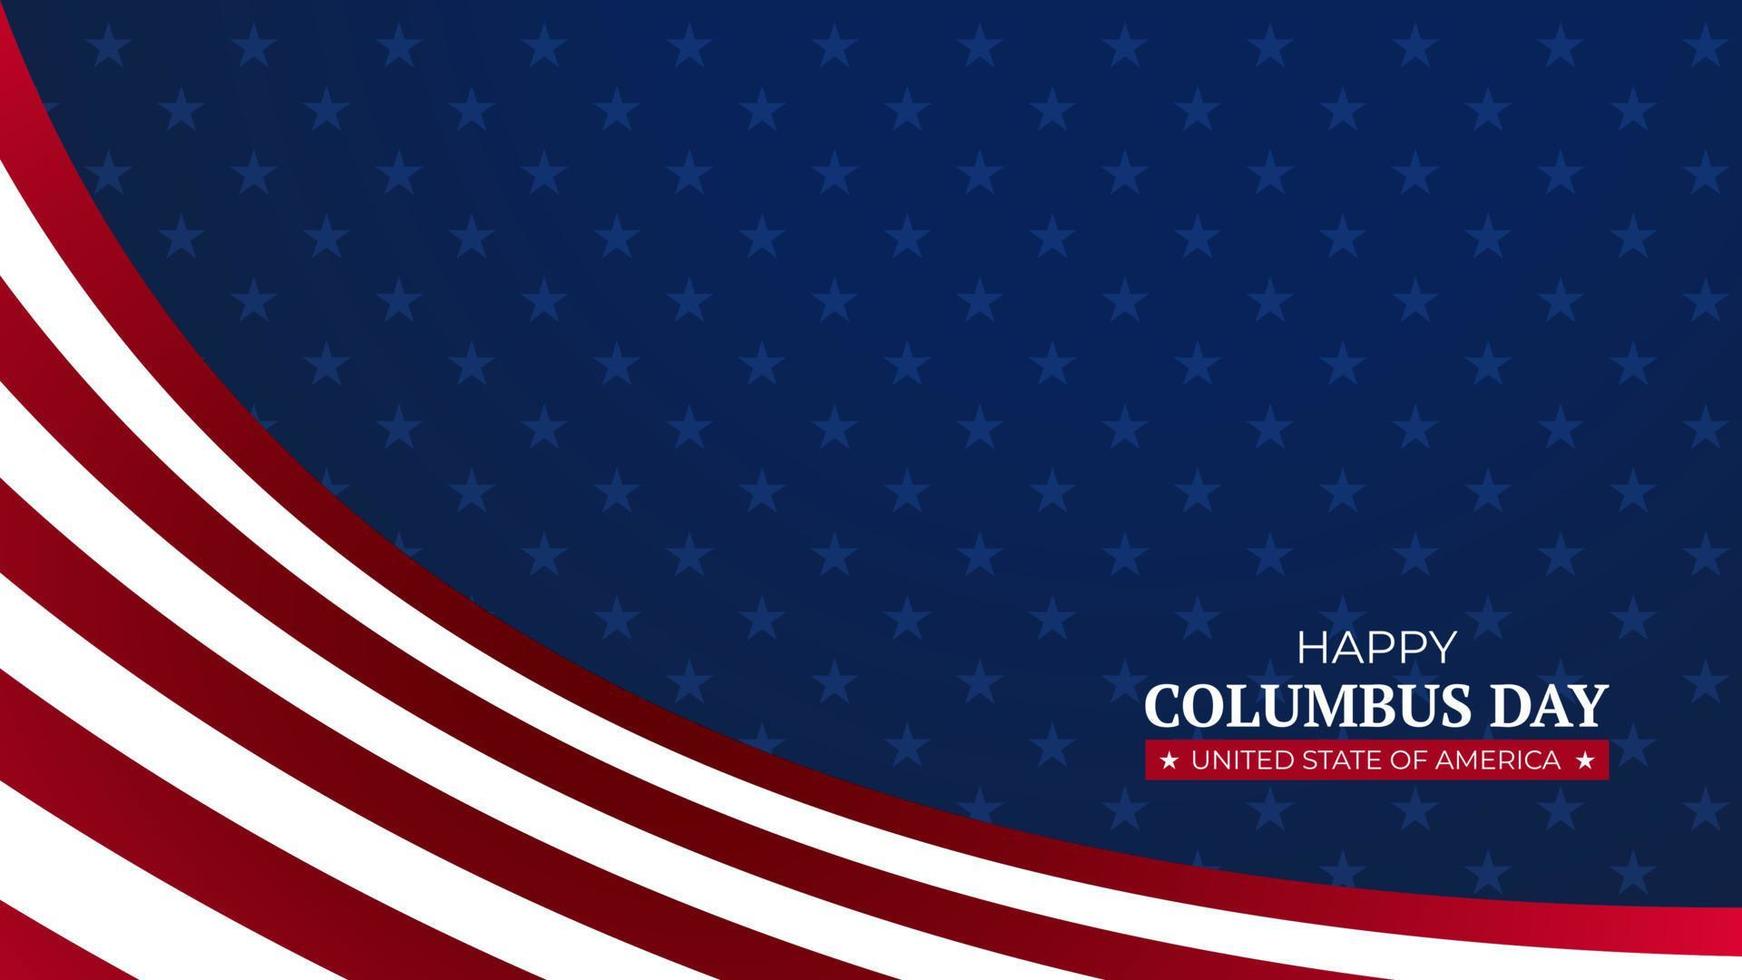 Columbus day united state of america background vector